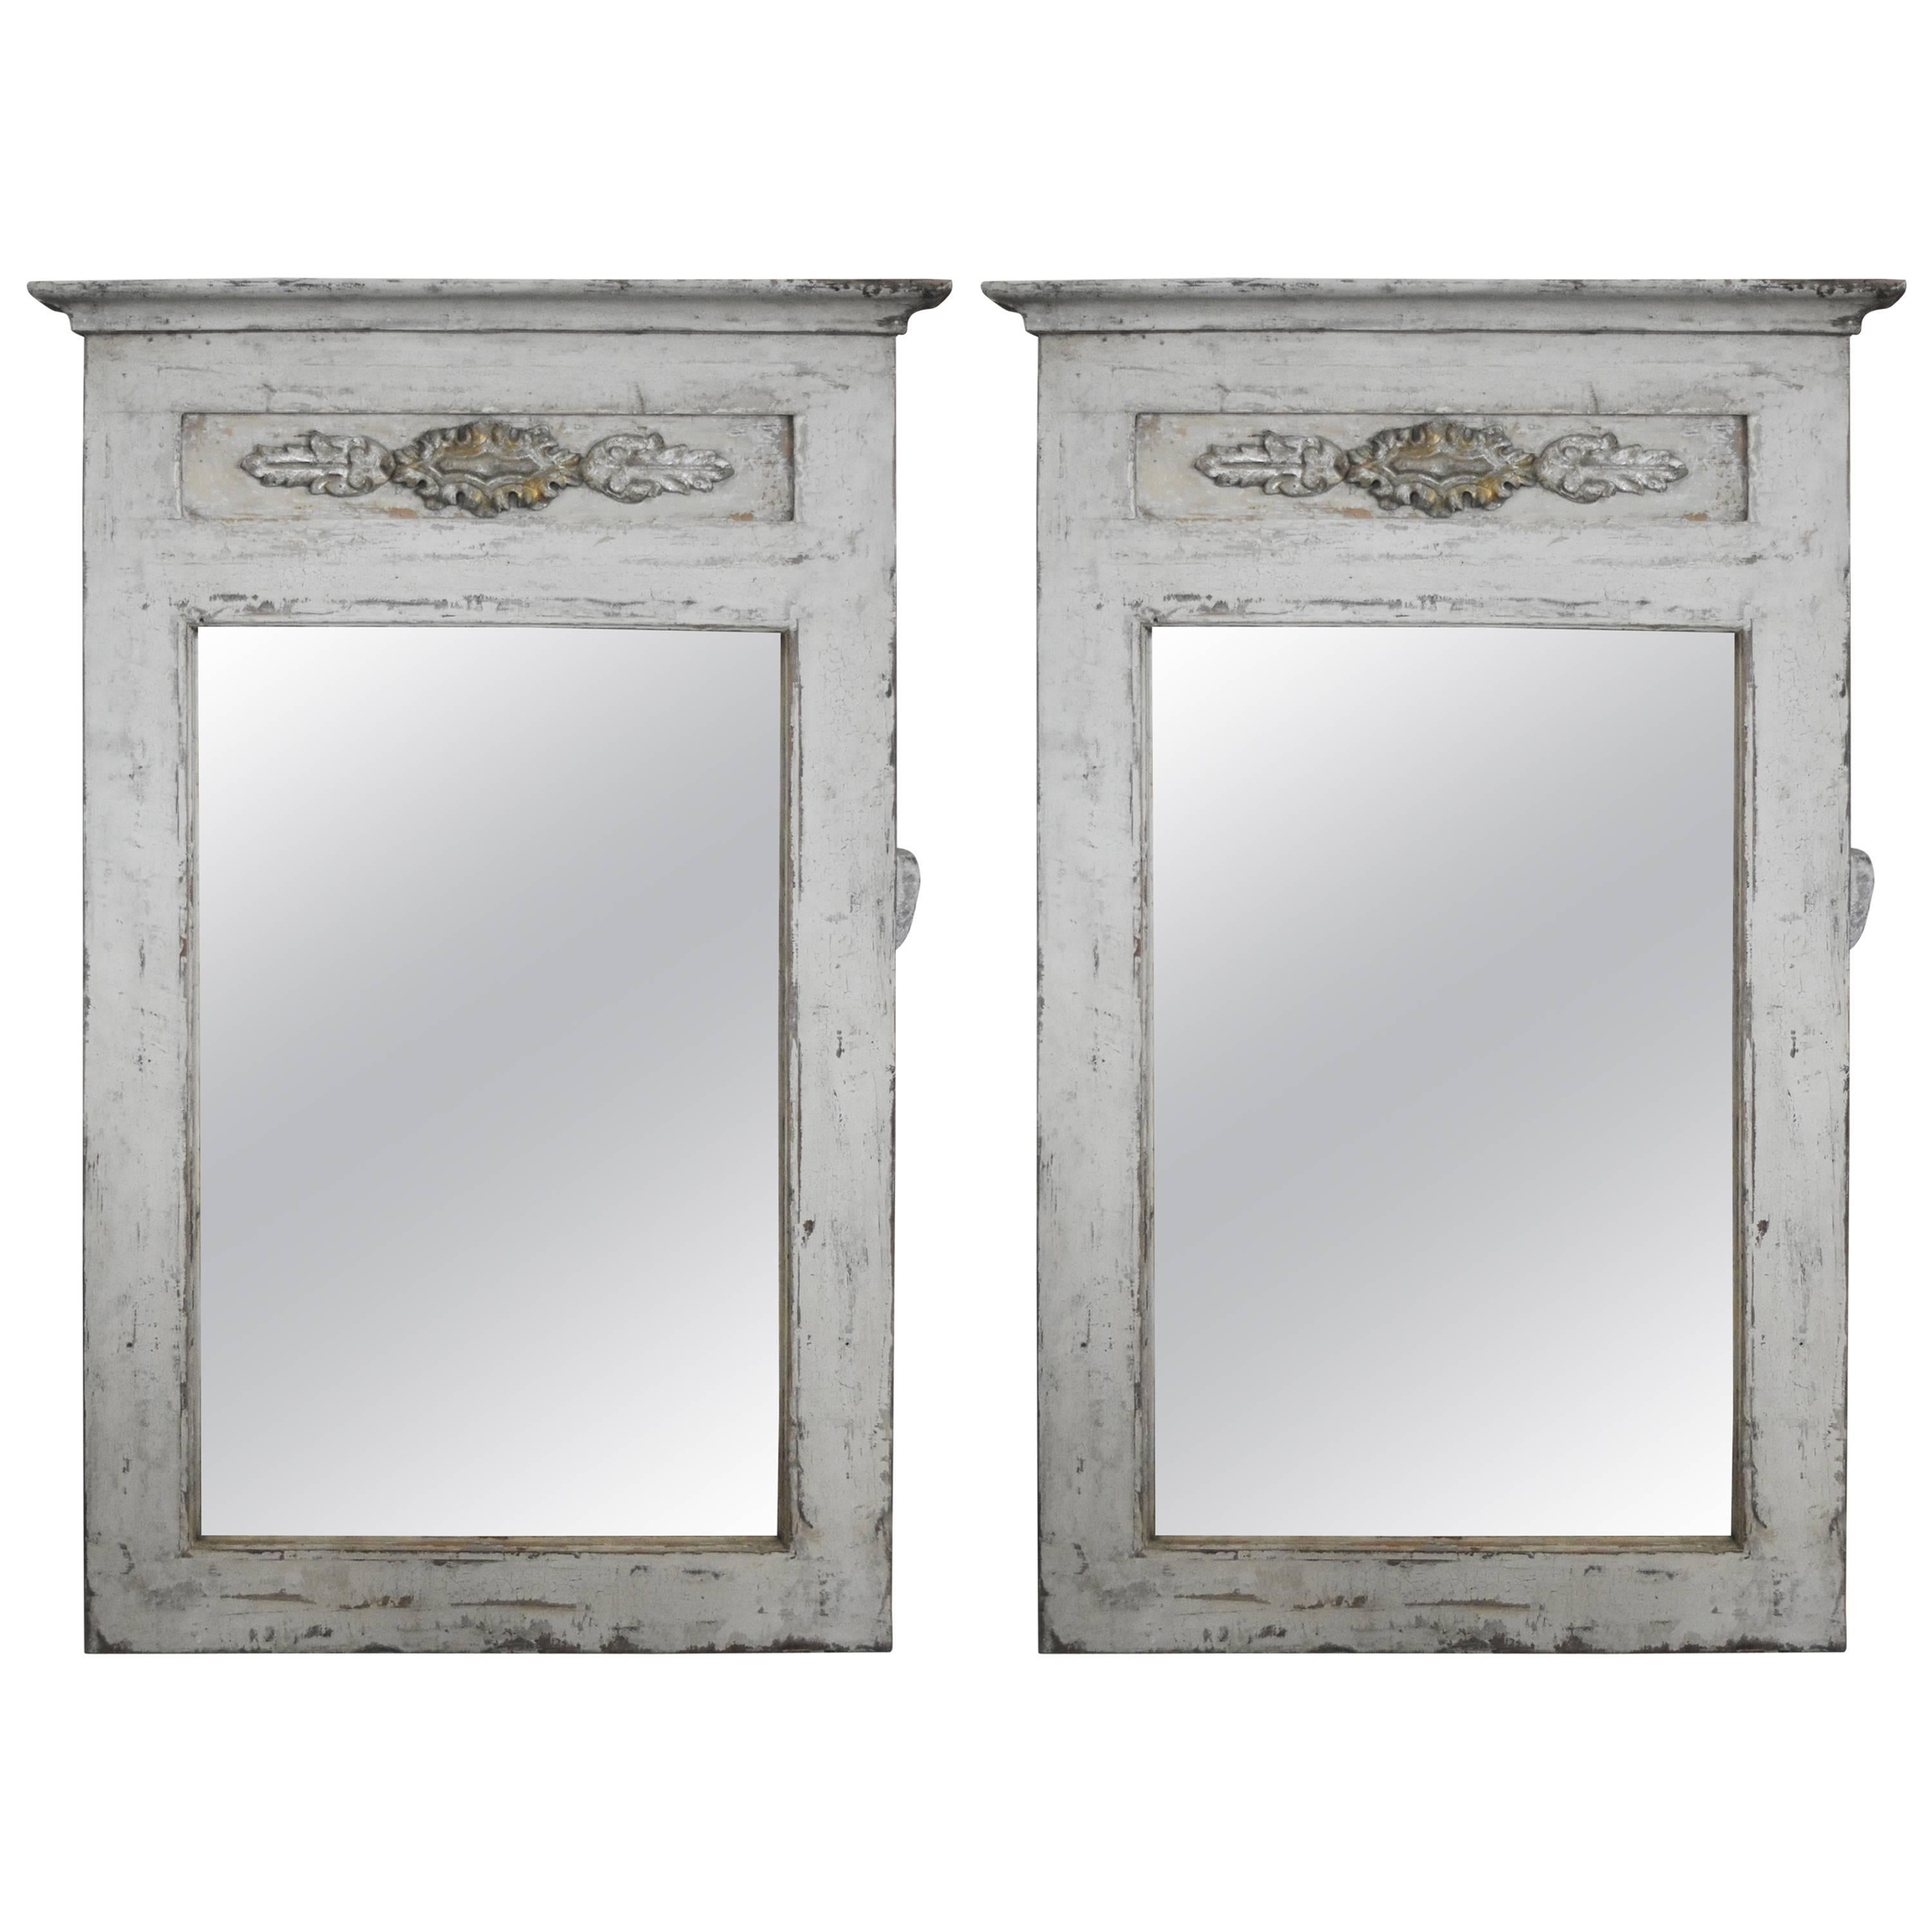 Pair of Painted Mirrors Made from Spanish Altar Elements and Old Wood